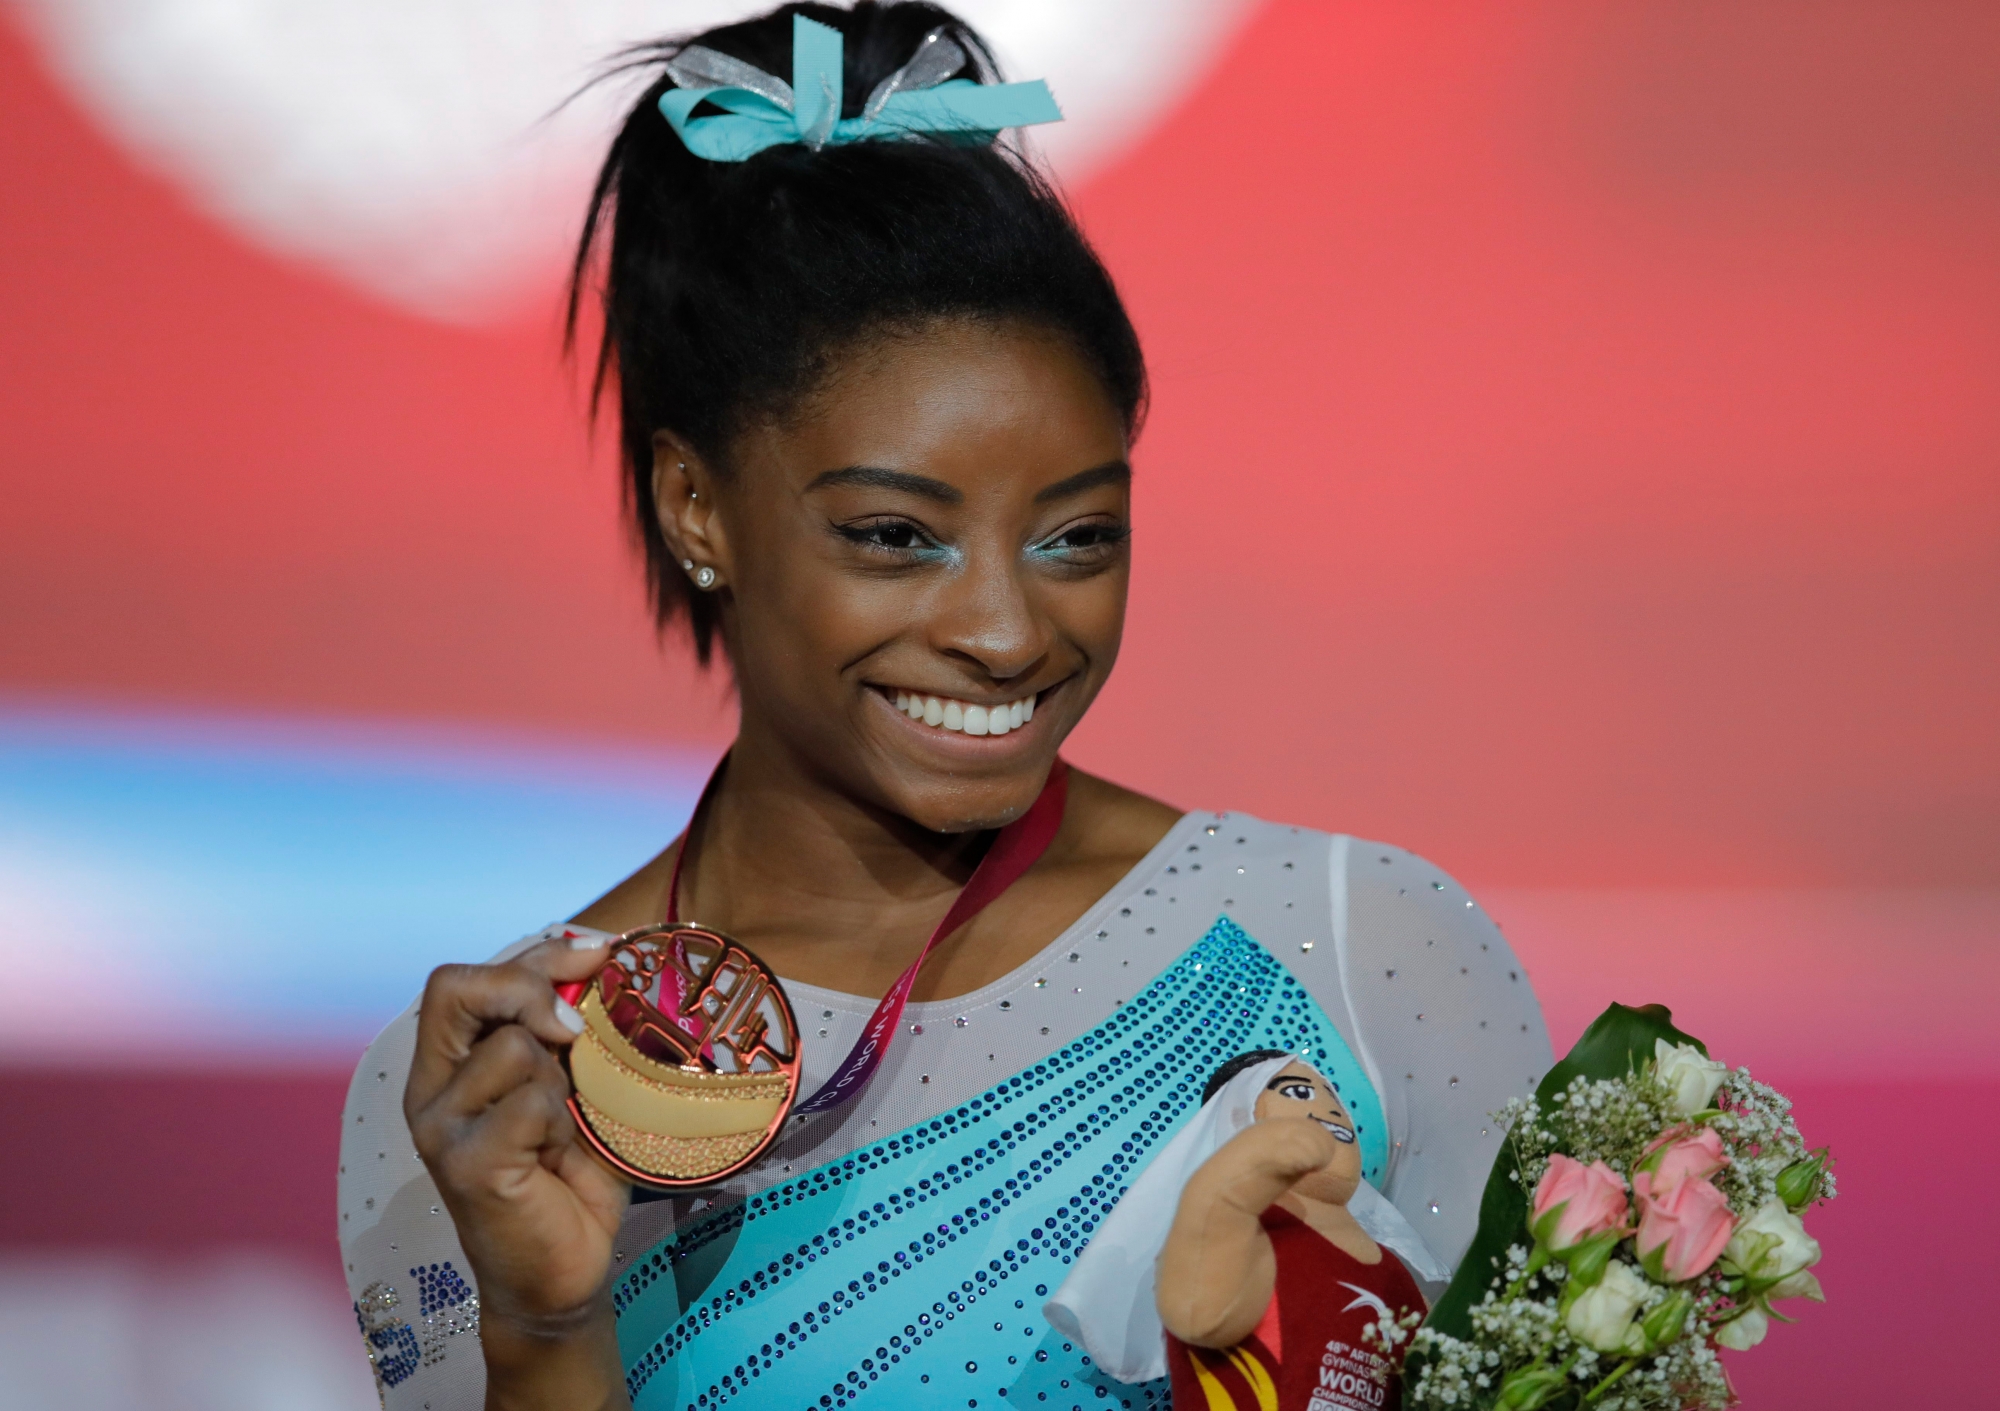 Gold medallist and four-times All-Around world champion Simone Biles of the U.S., poses on the podium after the Women's All-Around Final of the Gymnastics World Chamionships at the Aspire Dome in Doha, Qatar, Thursday, Nov. 1, 2018. (AP Photo/Vadim Ghirda) Qatar Gymnastics World Championships